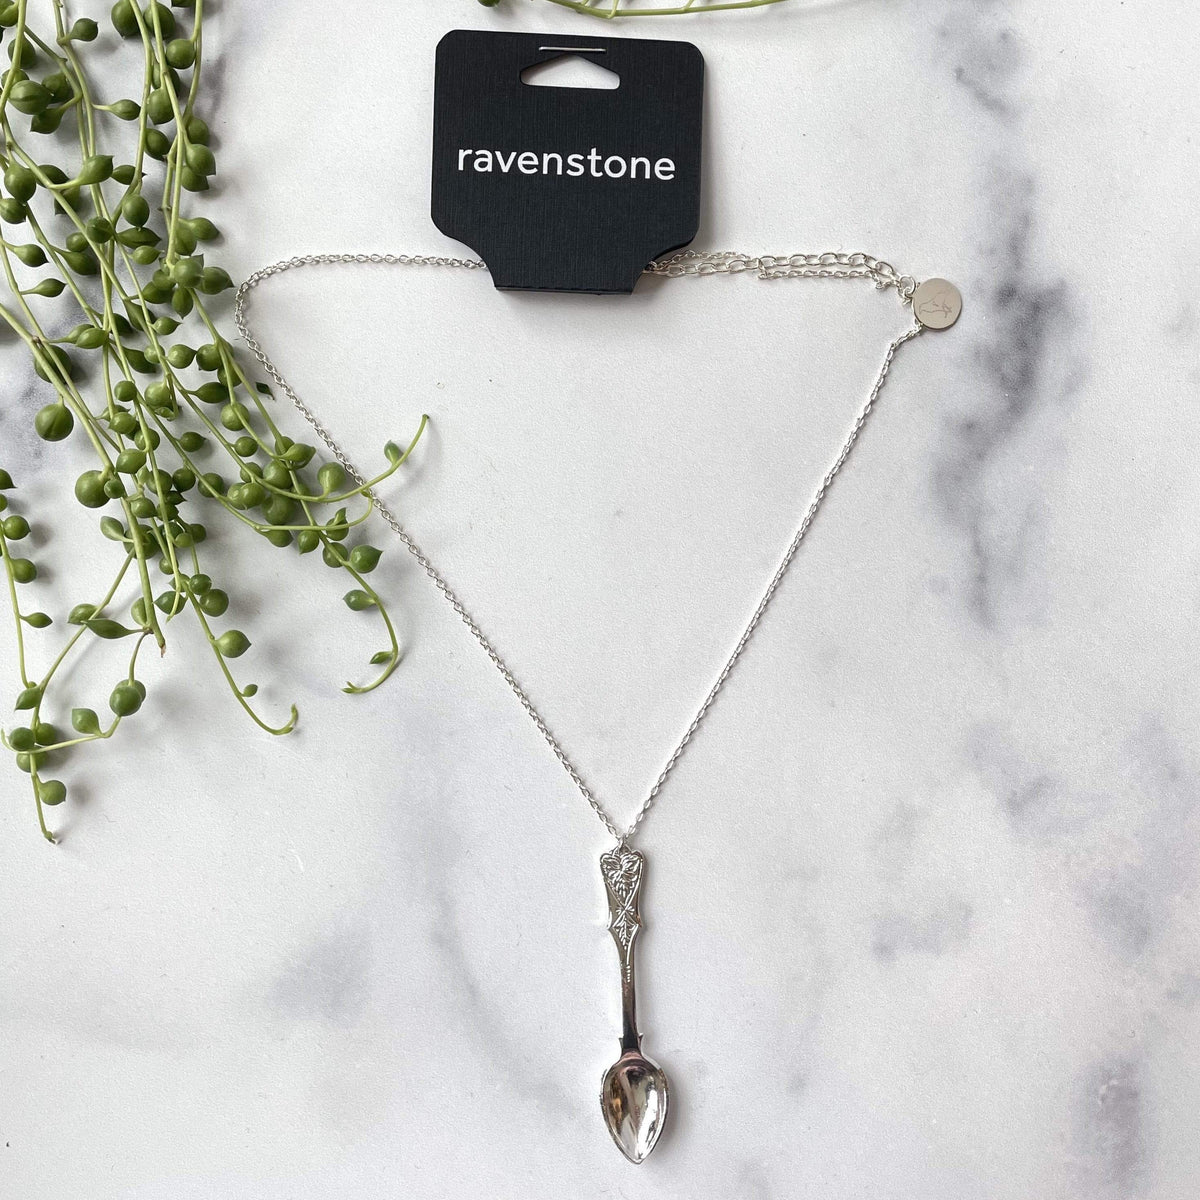 Ravenstone The Silver Spoon Necklace